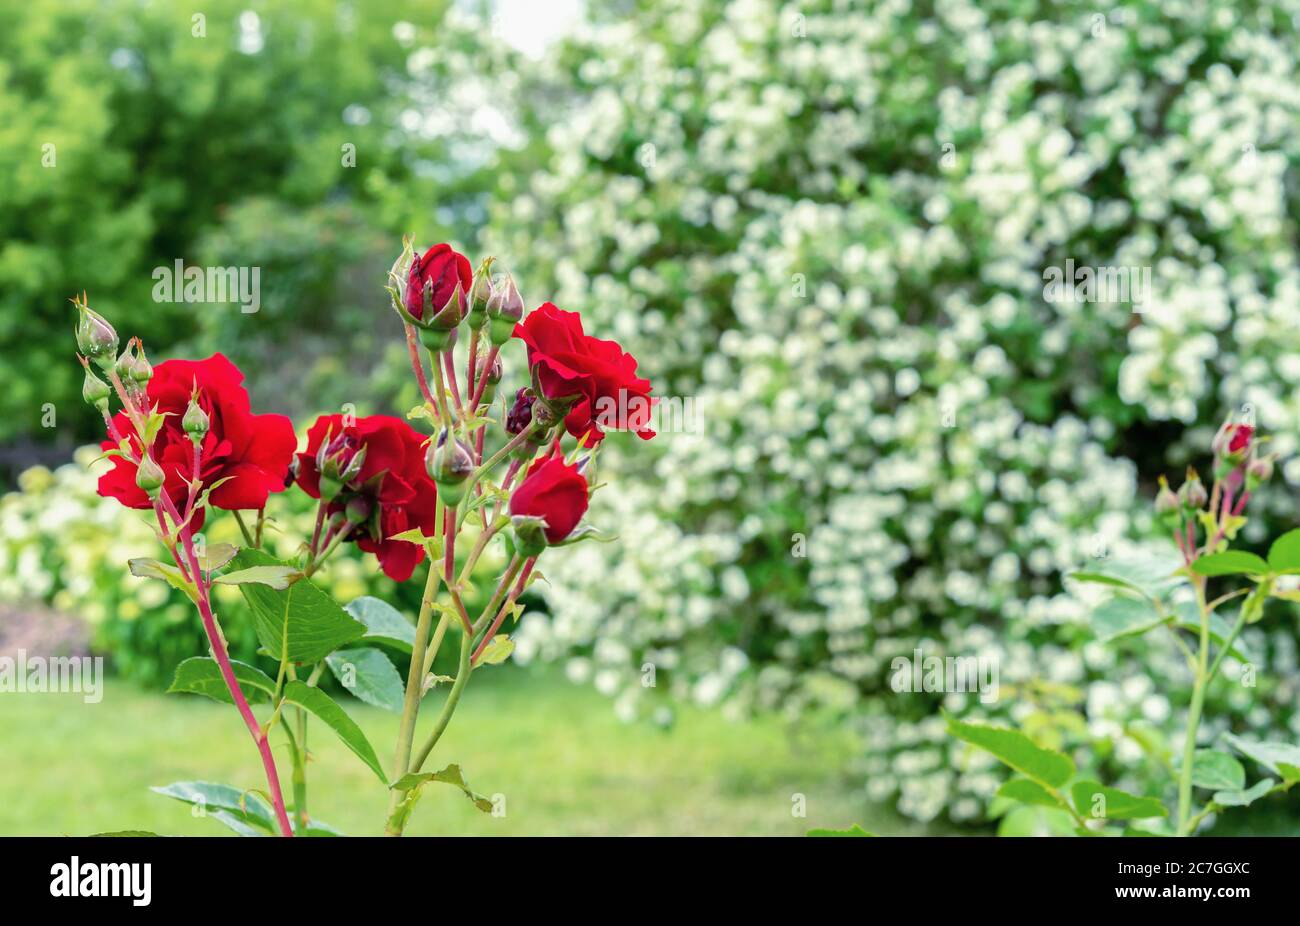 Blooming red roses on a background of a jasmine tree. Stock Photo